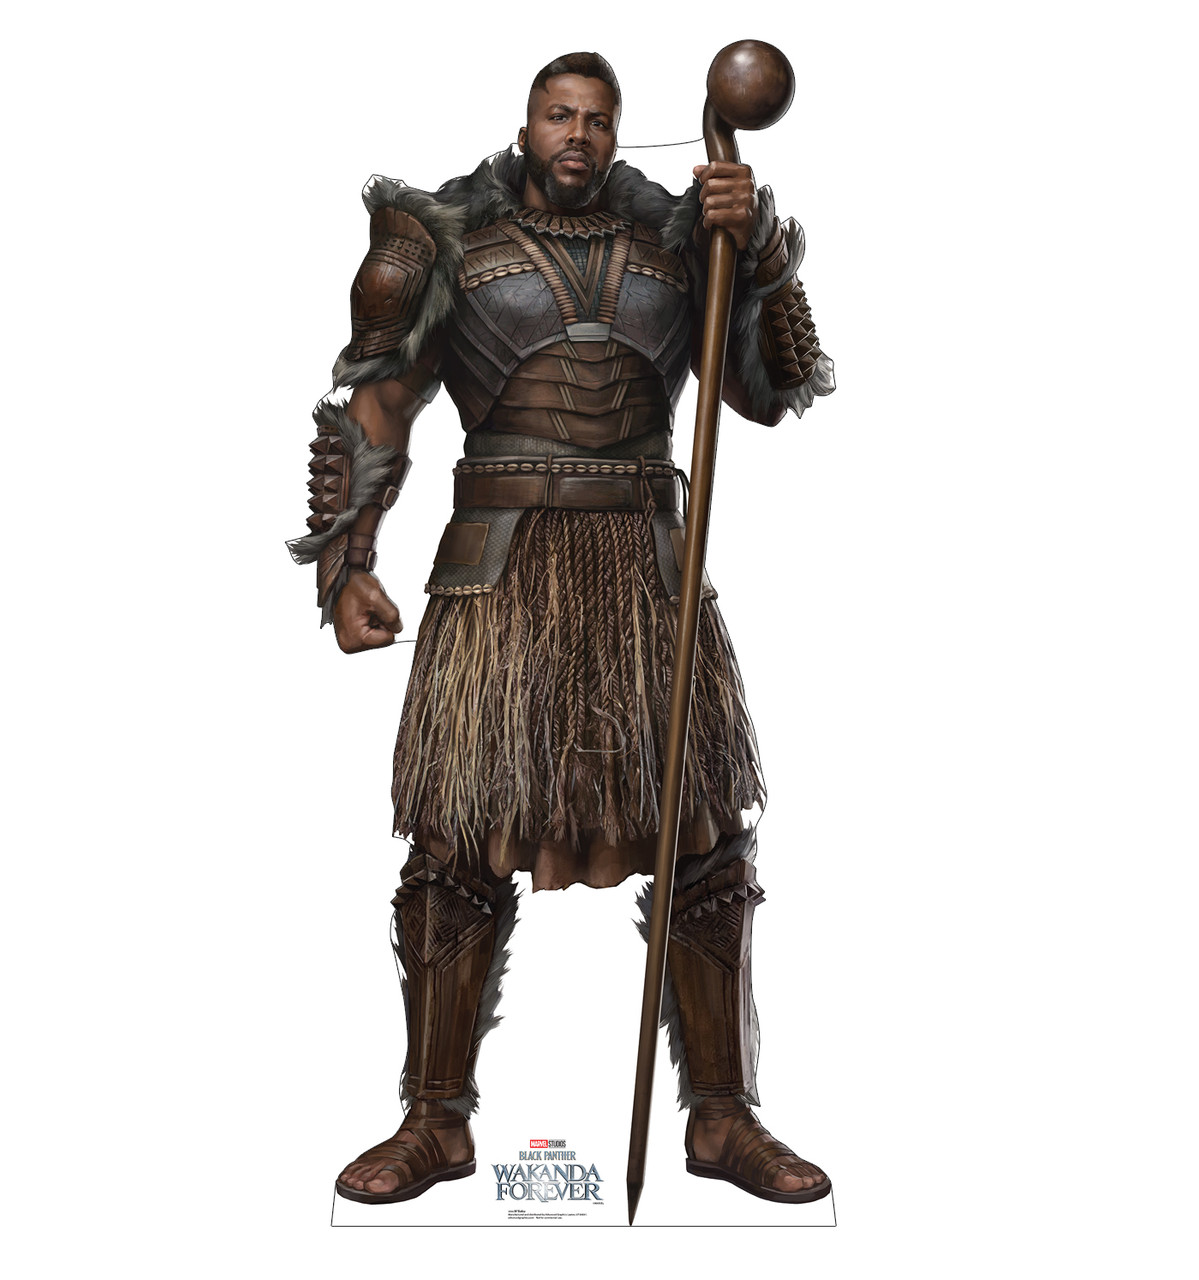 Life-size cardboard standee of M'Baku from Marvels Black Panther Wakanda Forever movie.